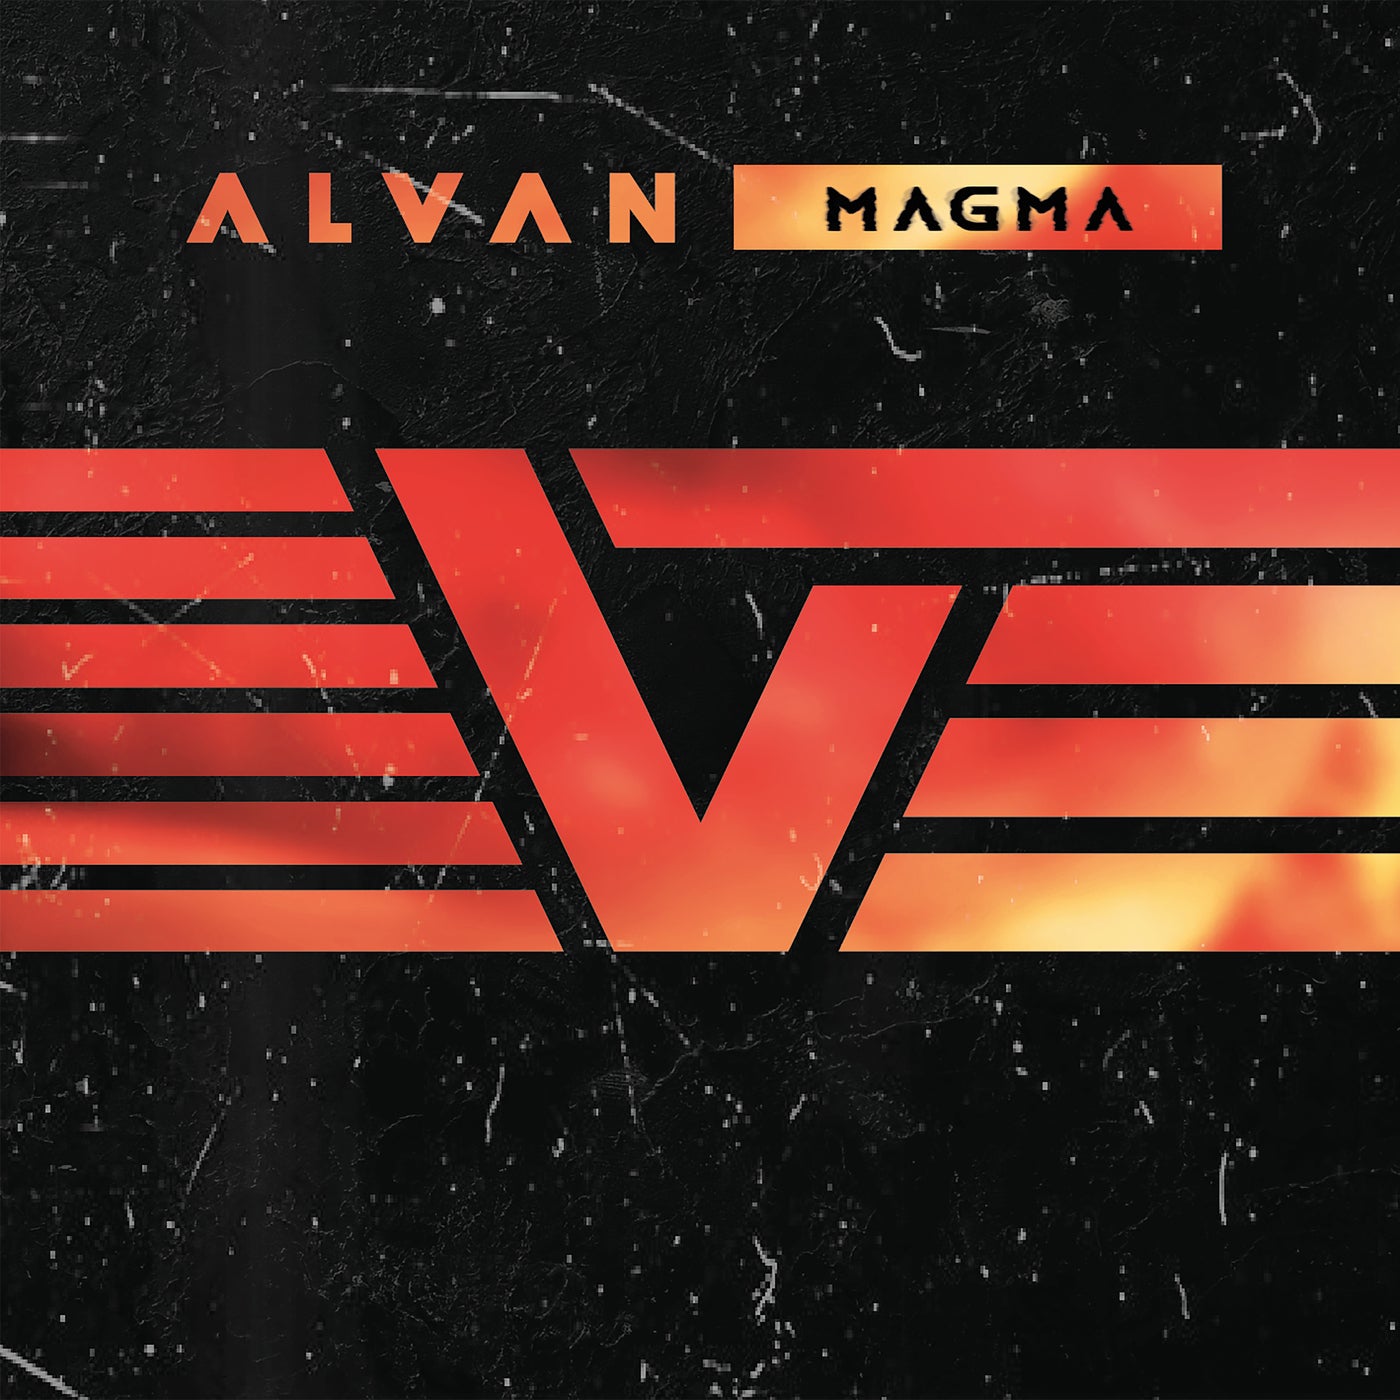 Magma by Alvan and Ahez on Beatsource